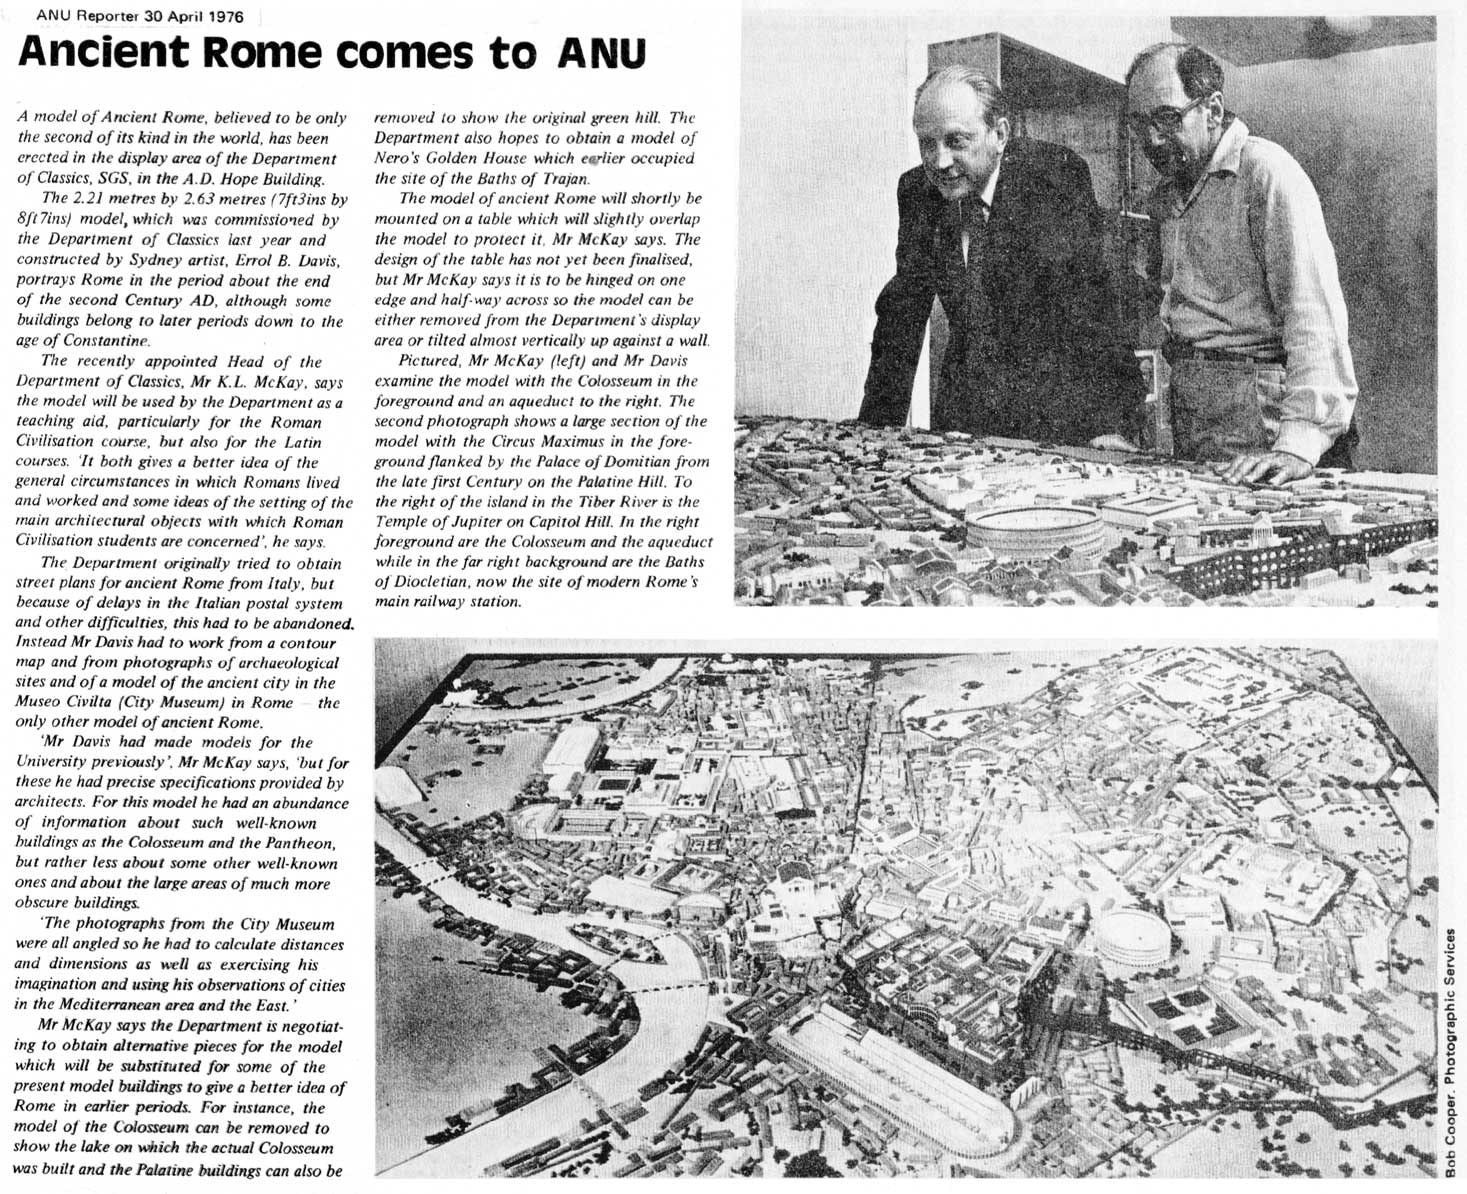 Article from ANU Reporter: Ancient Rome Comes to ANU, 30th April 1976